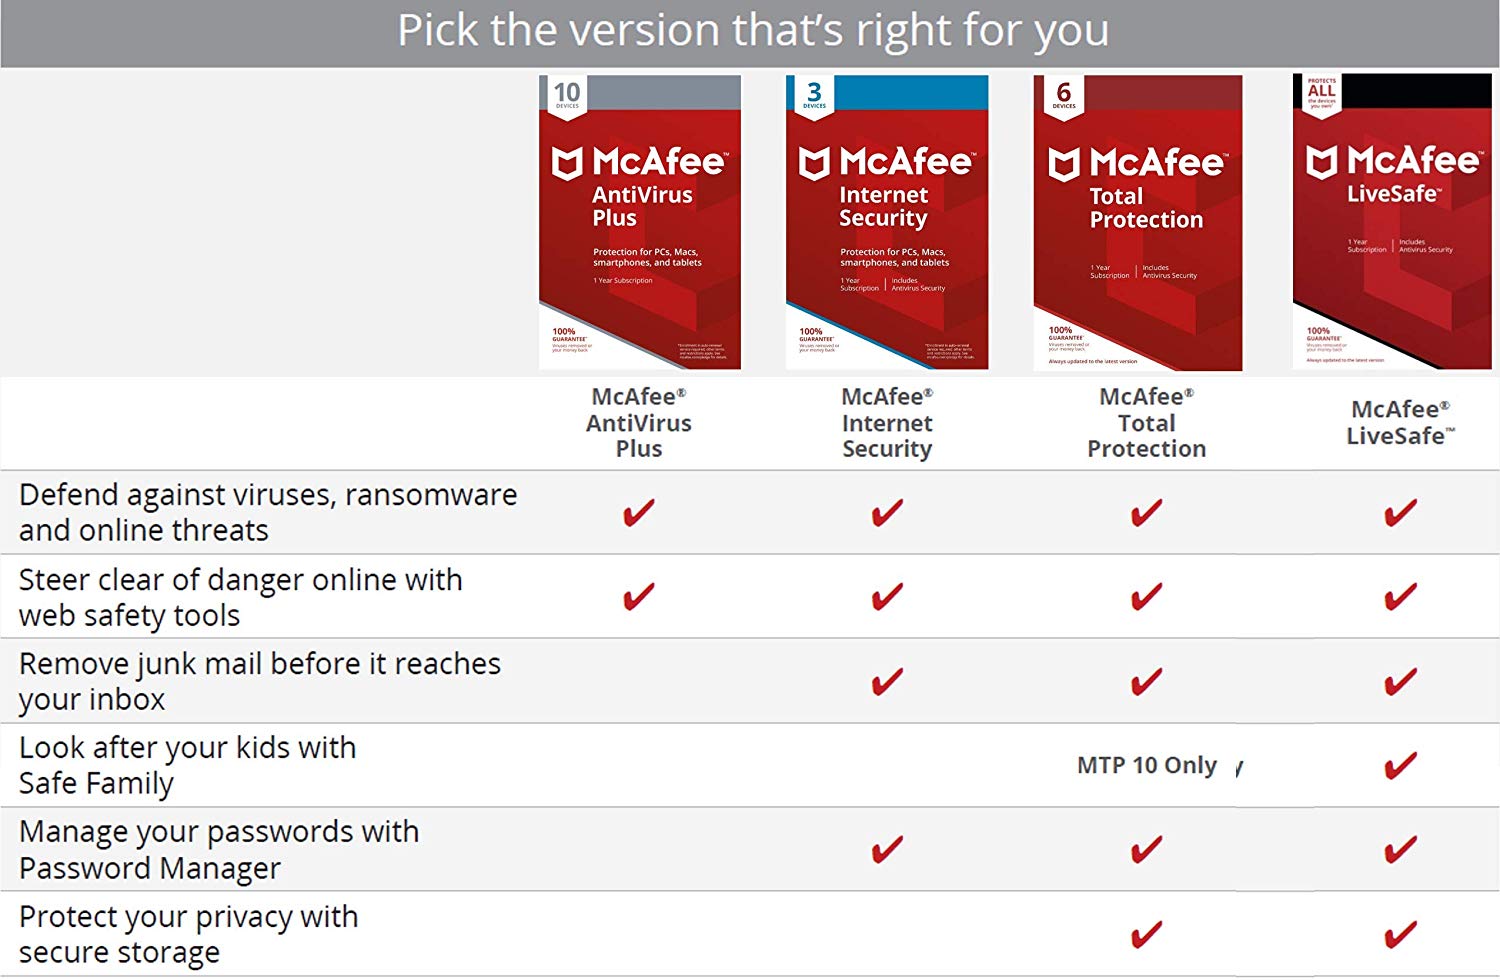 mcafee total protection 5